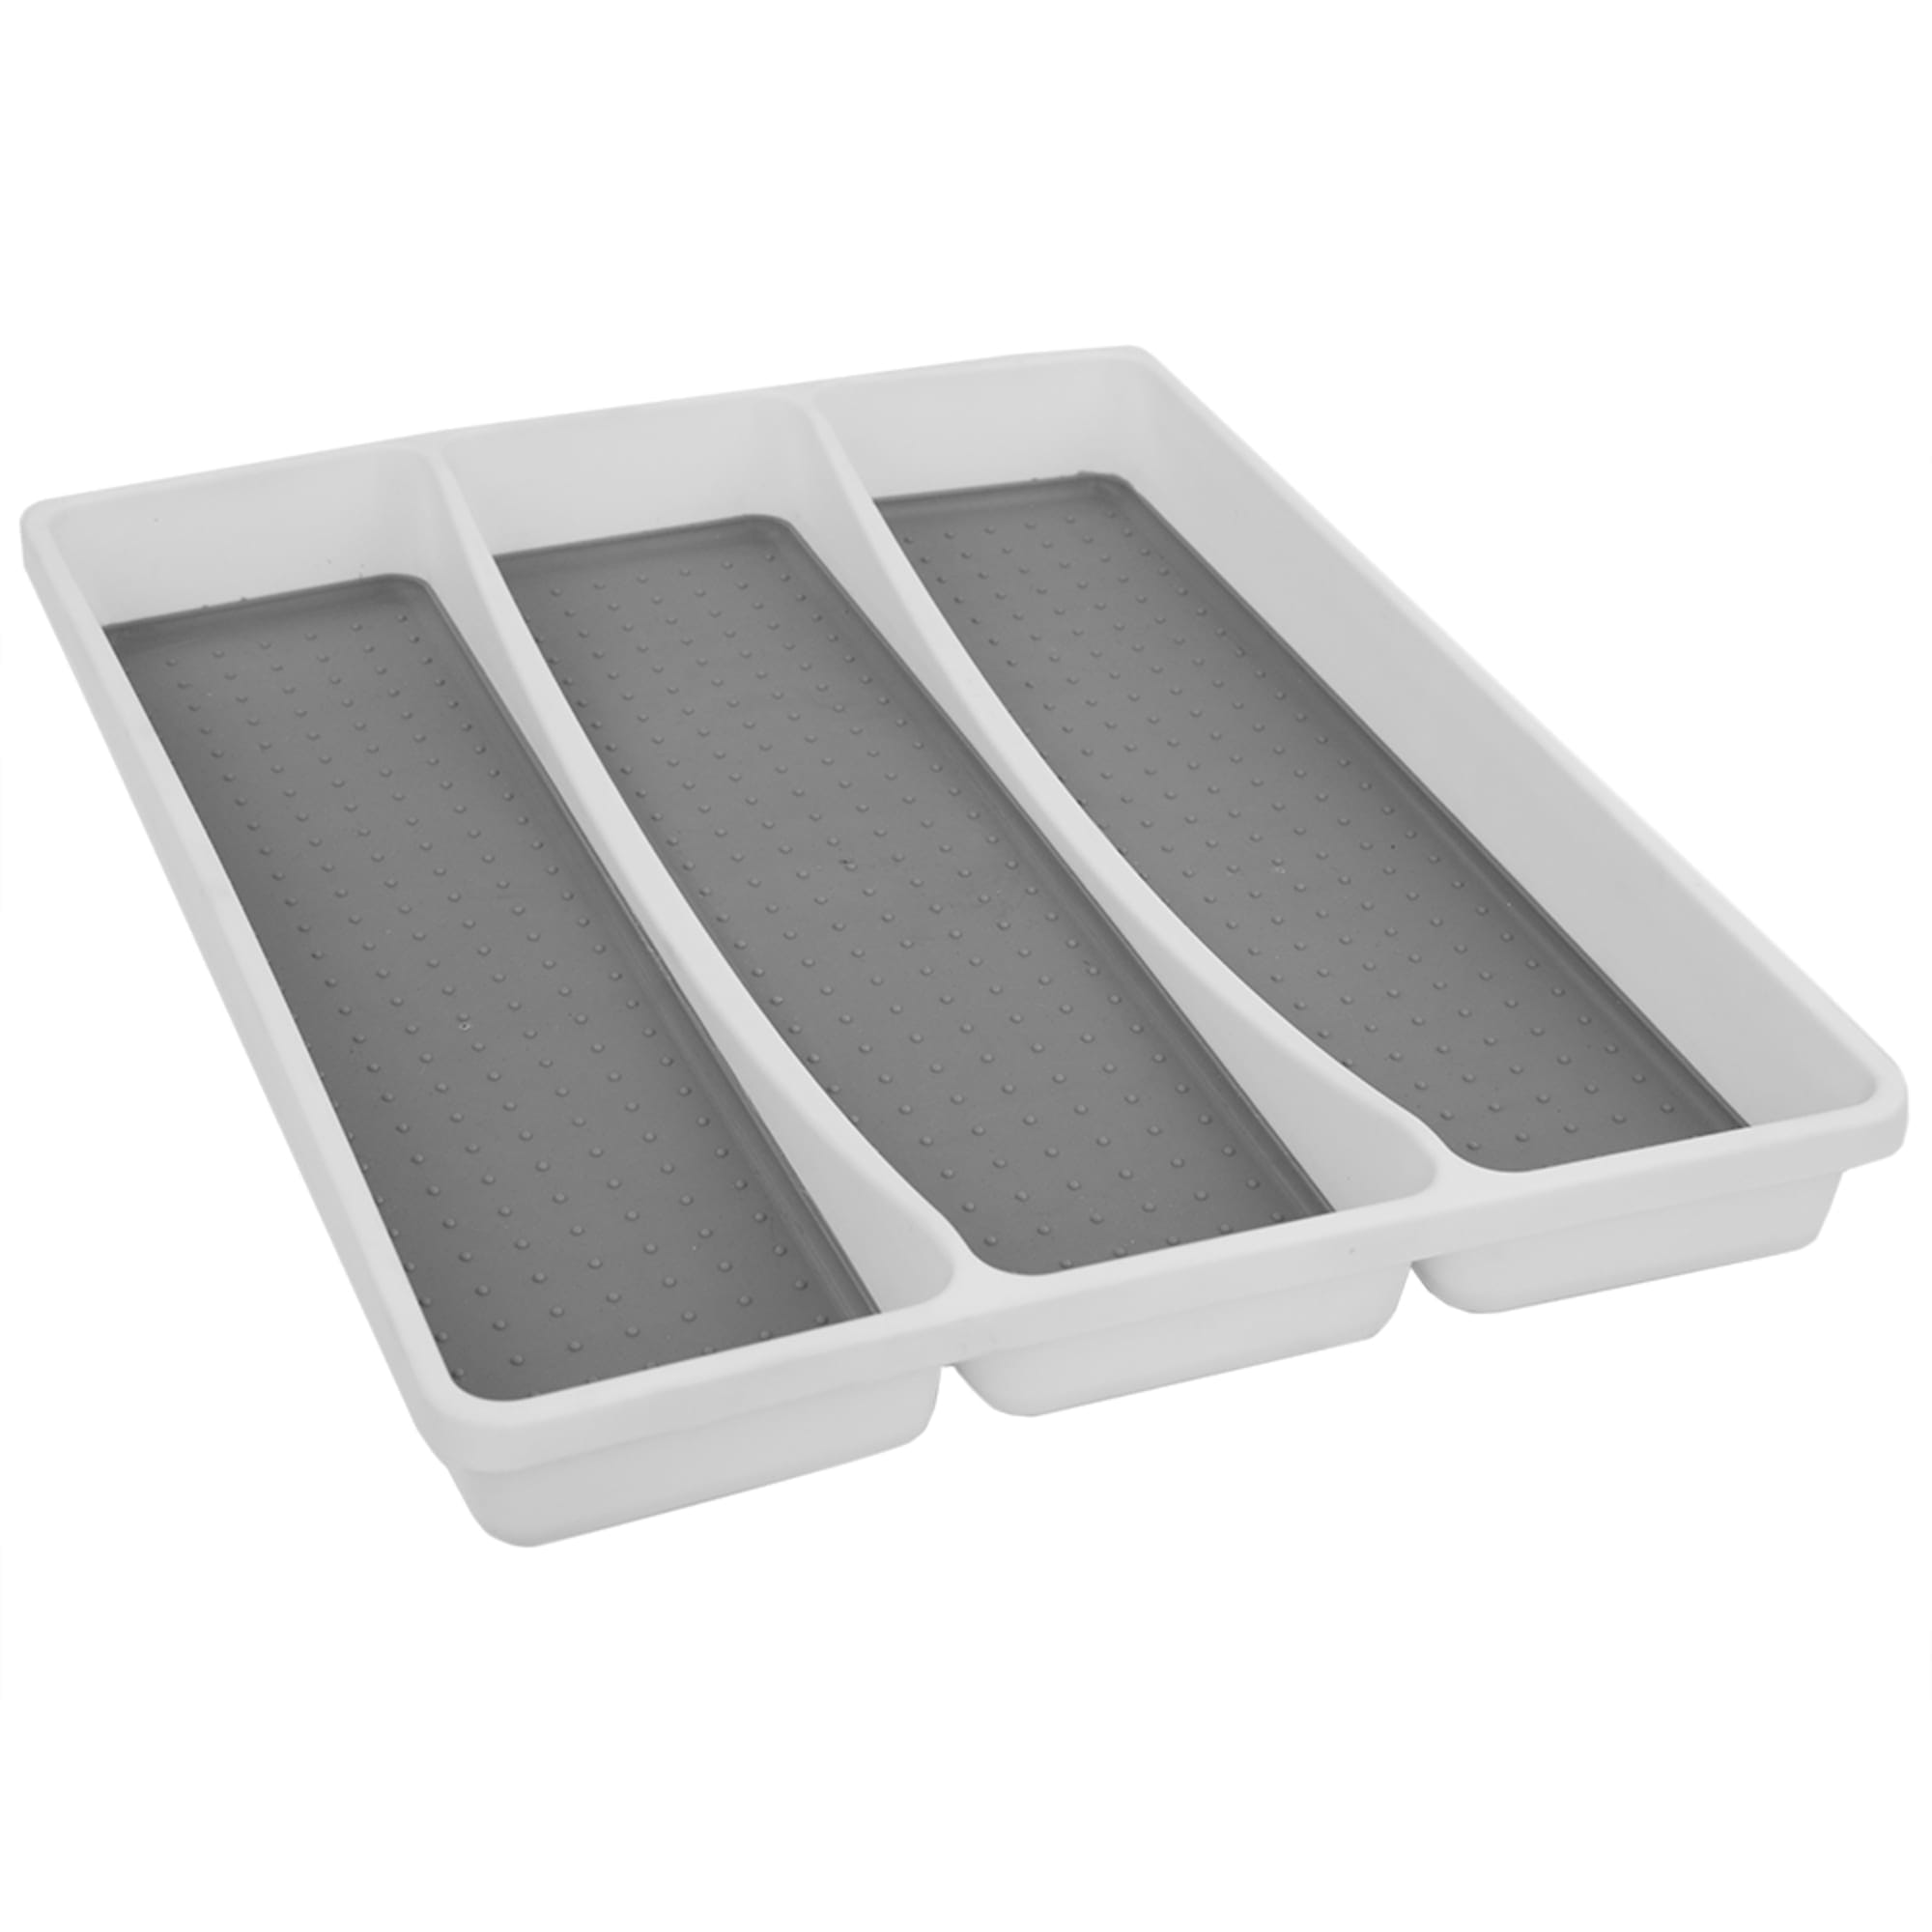 Home Basics Utensil Tray with Rubber Lined Compartments $6.50 EACH, CASE PACK OF 12